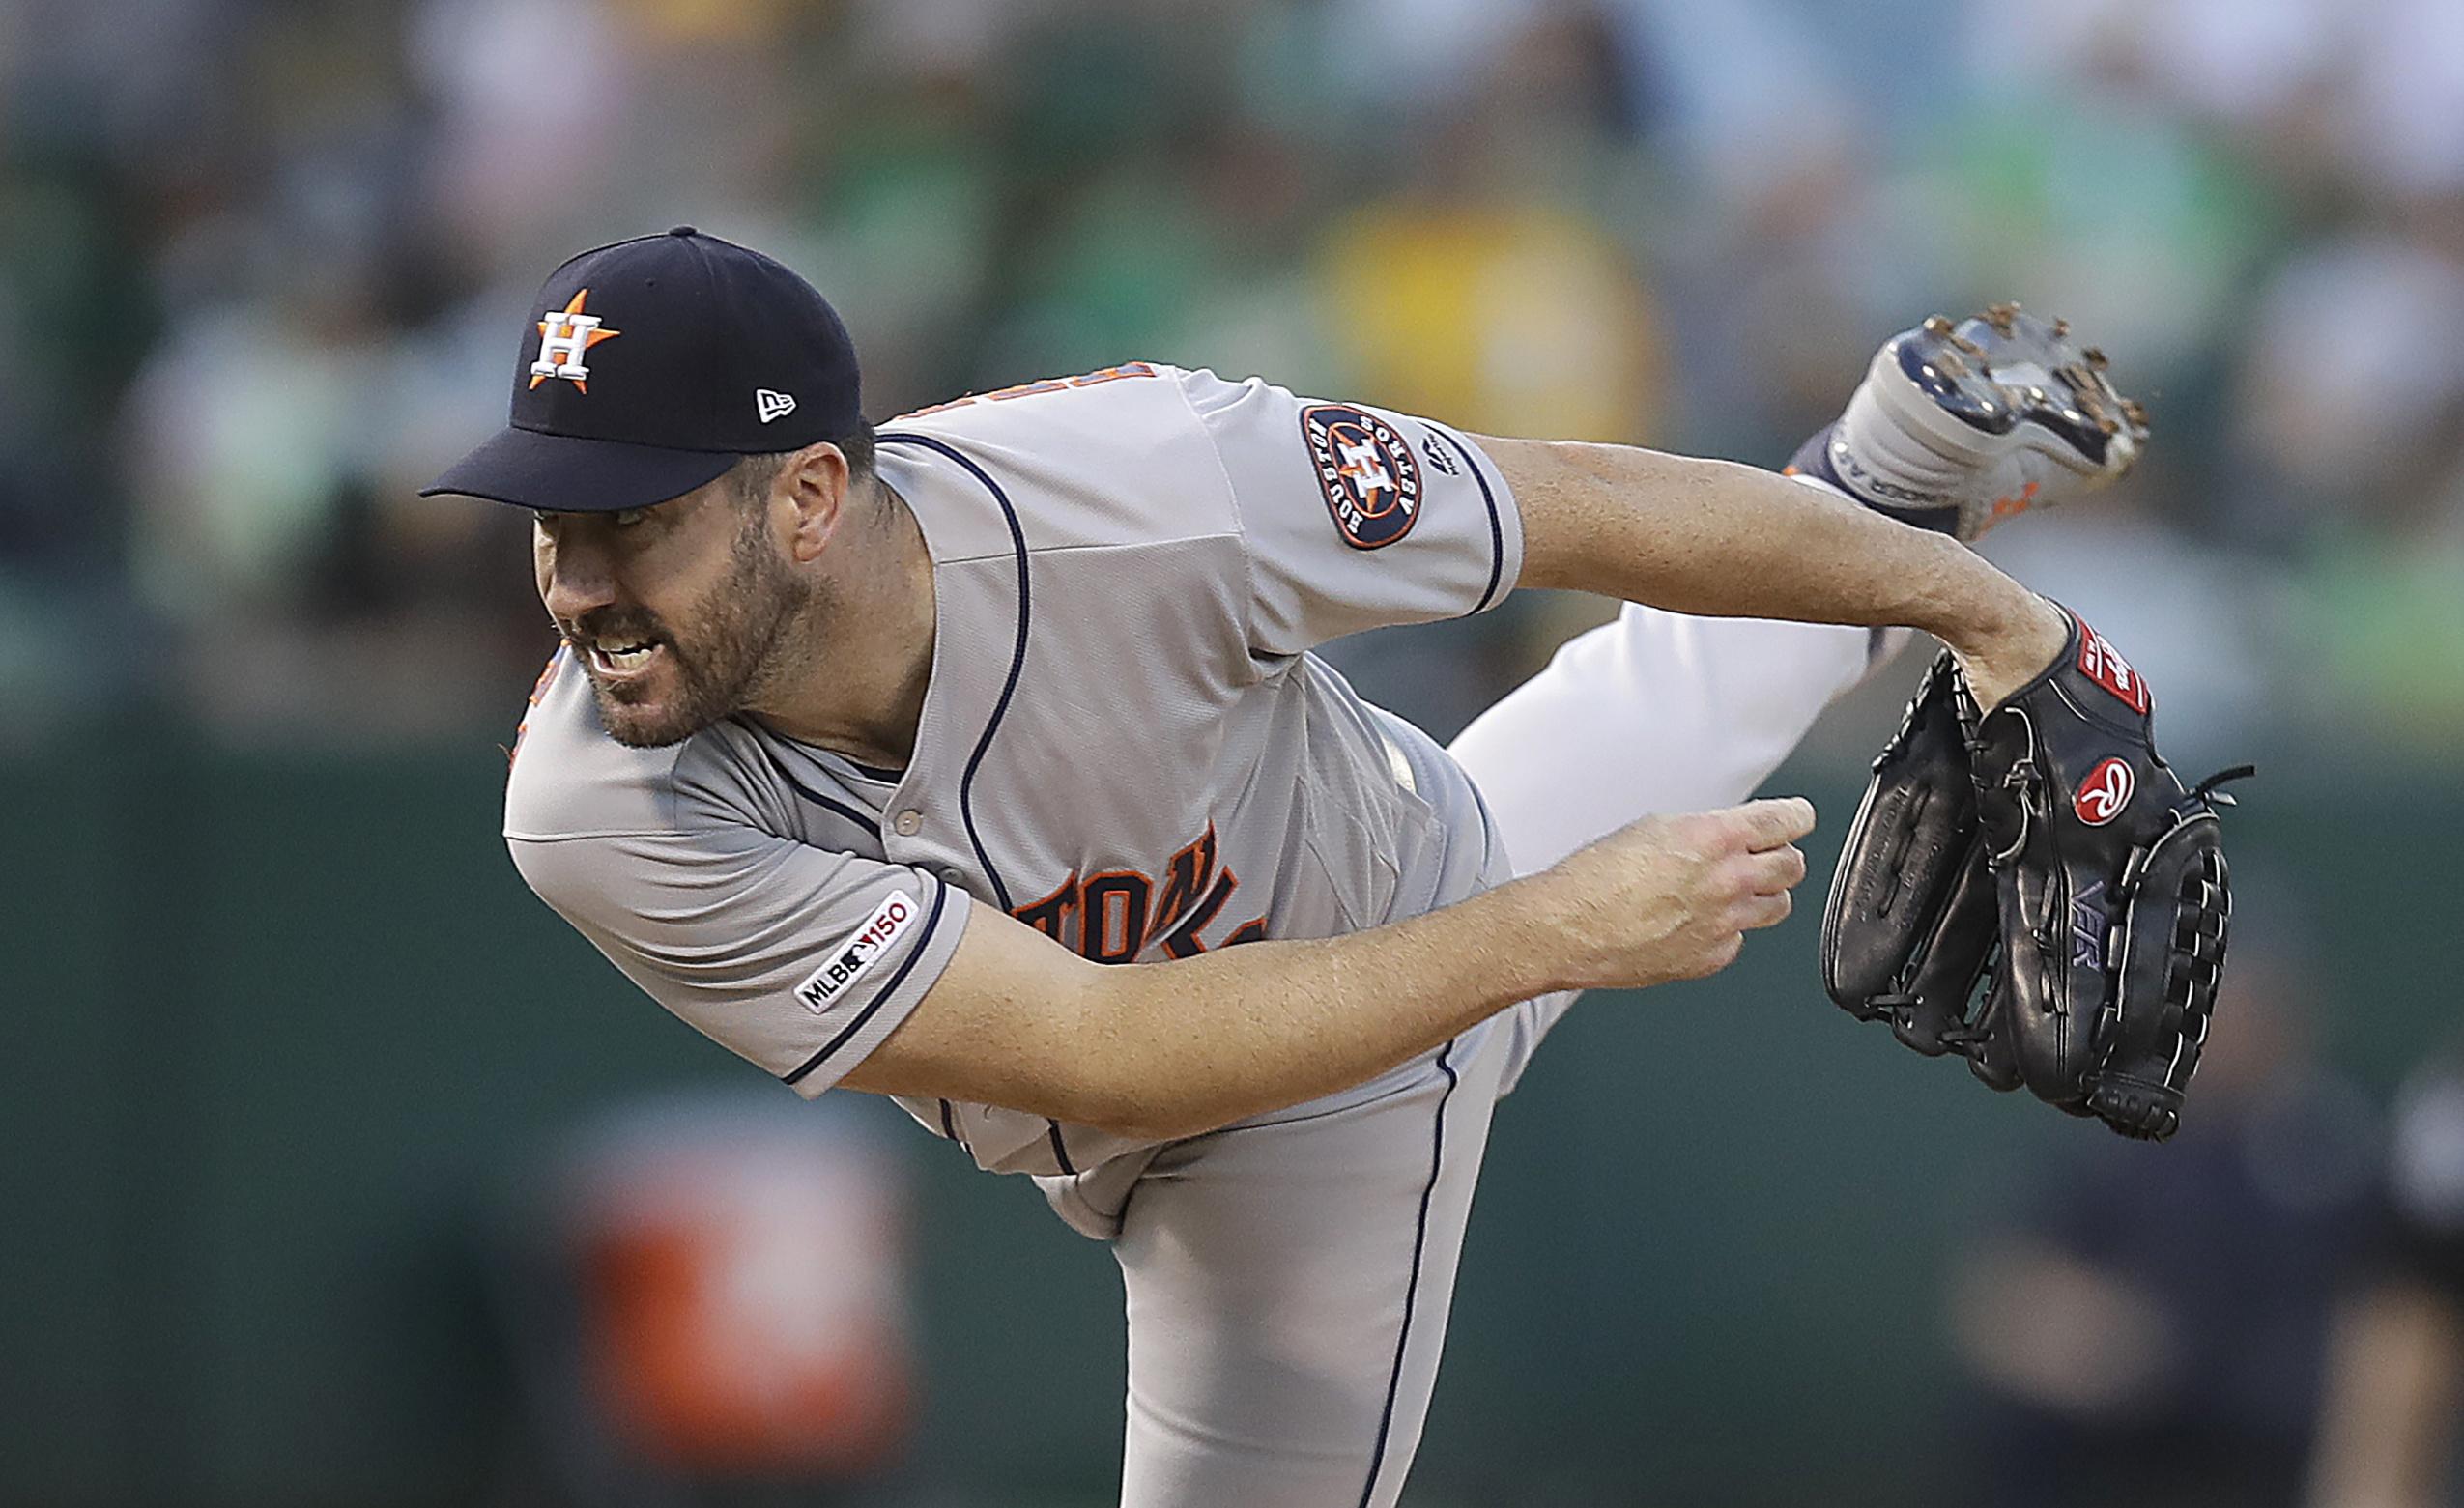 Justin Verlander blocks Detroit Free Press writer from access to clubhouse  - Washington Times